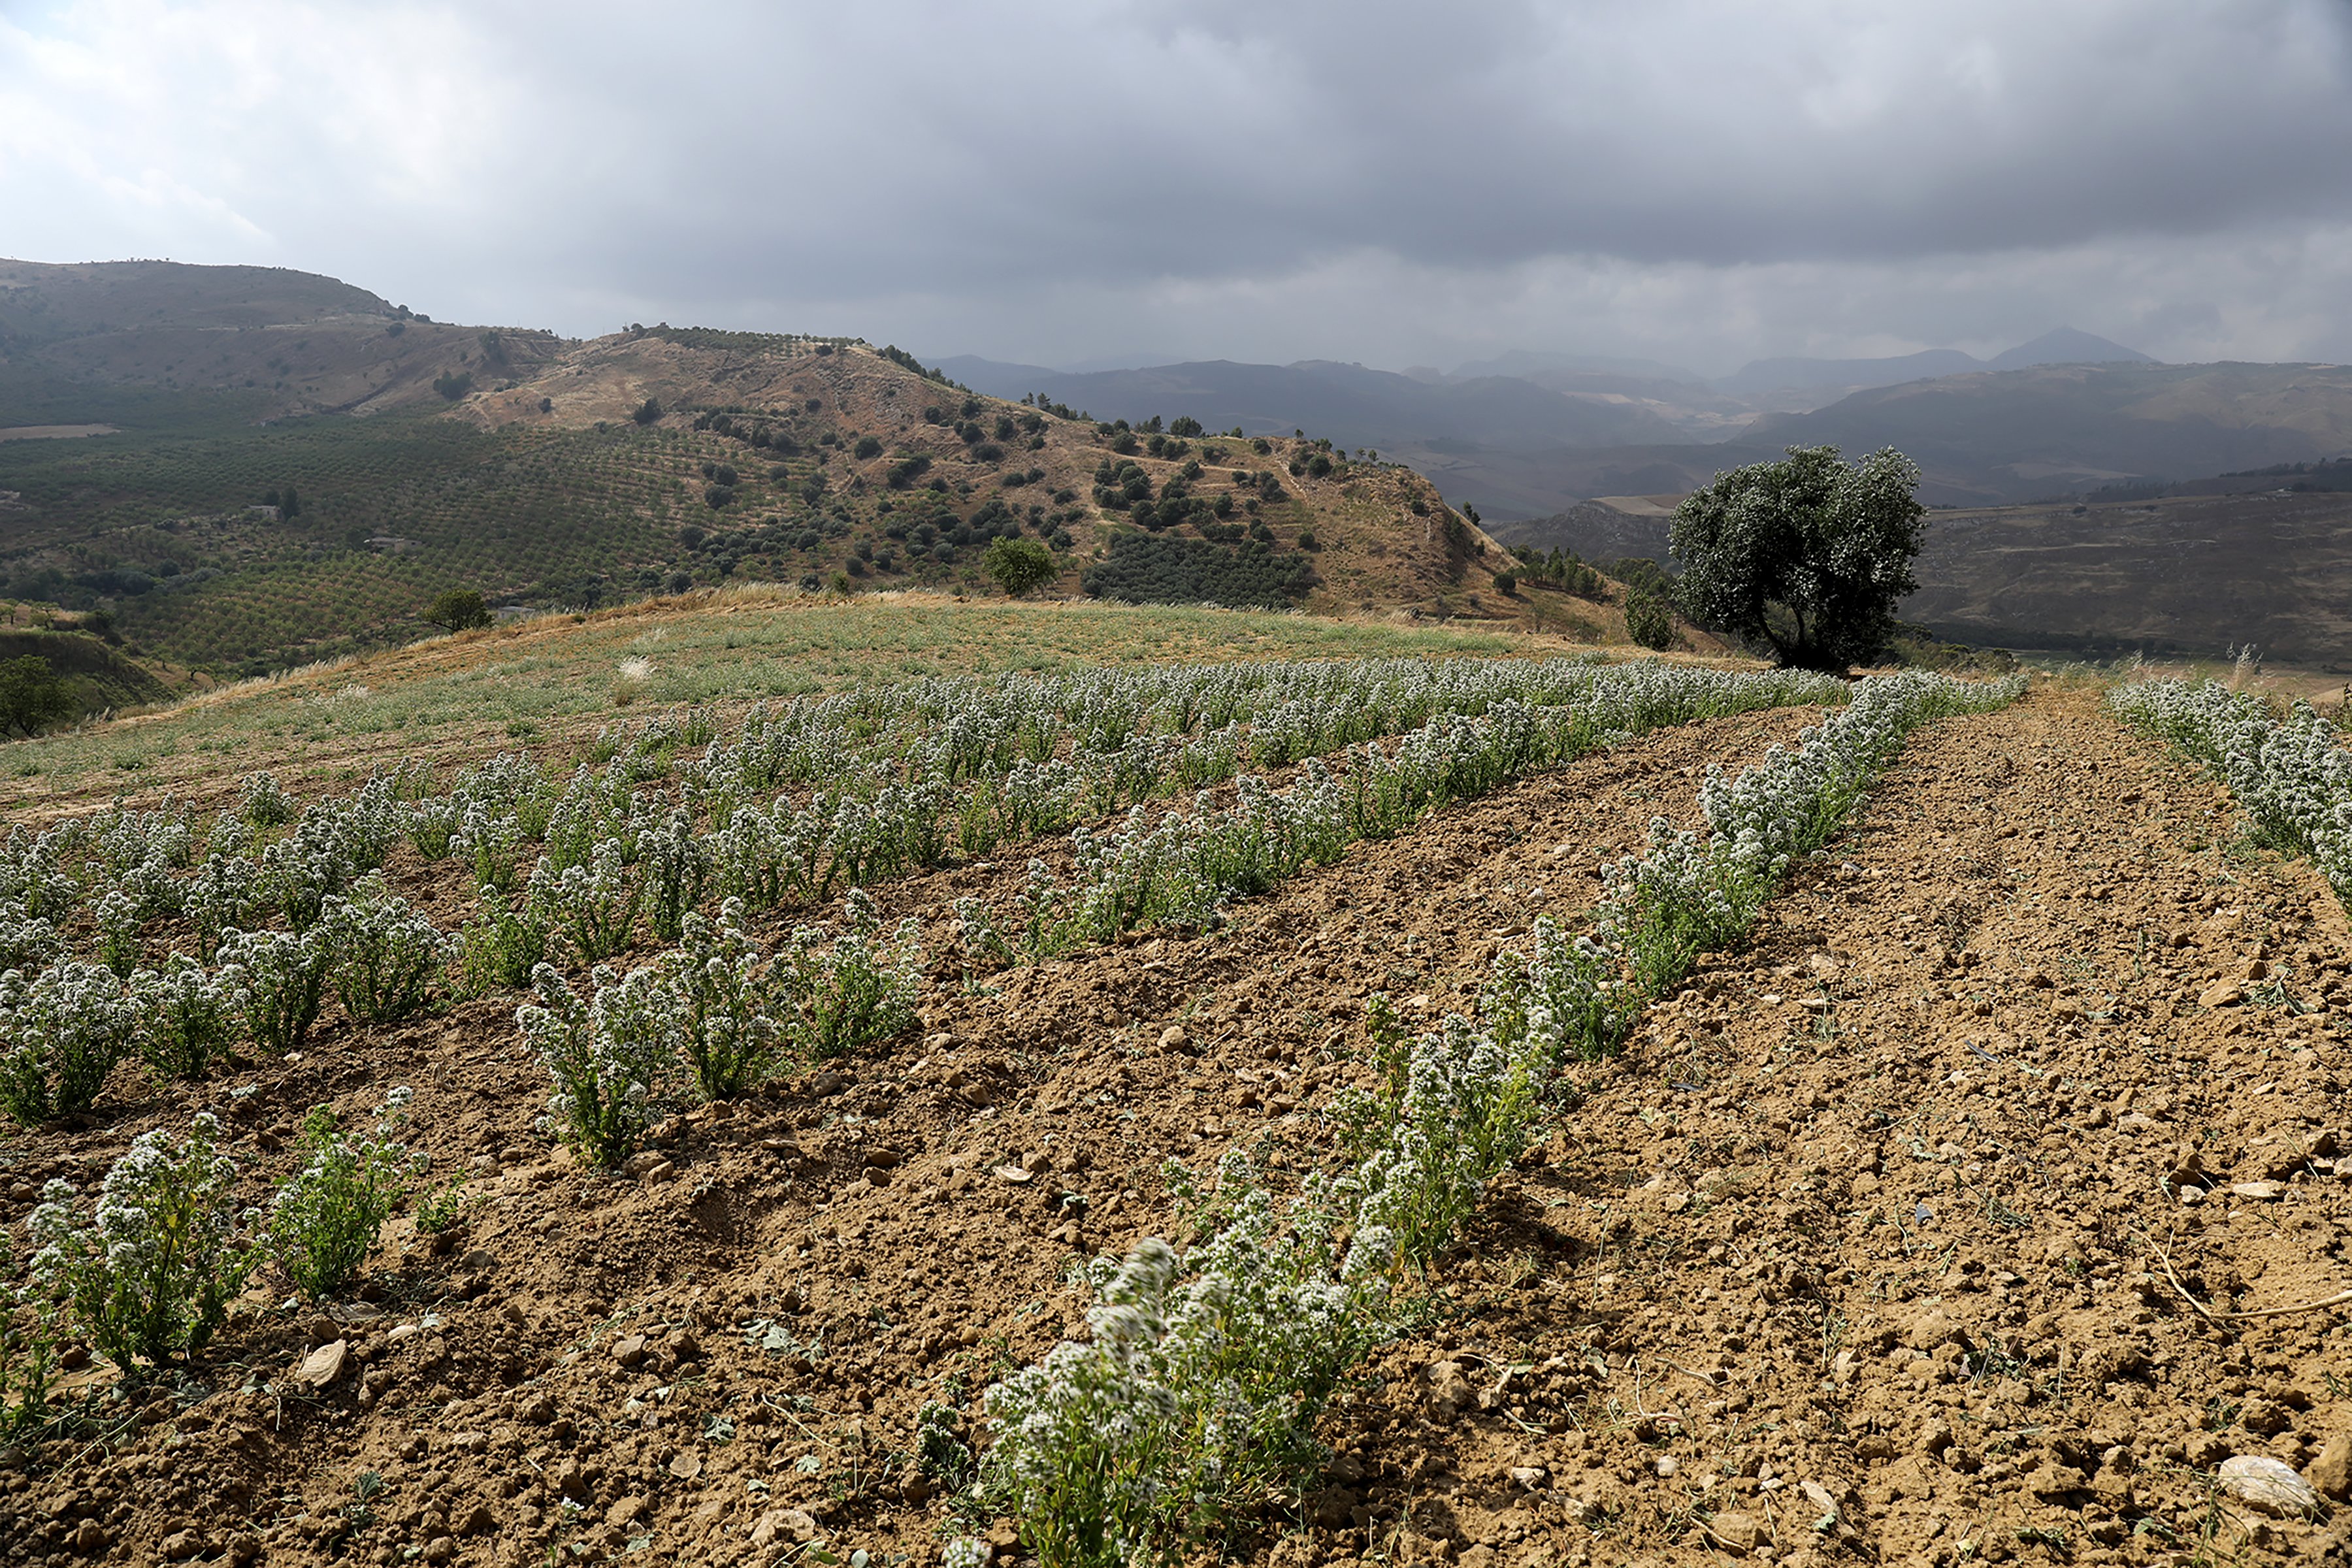 Rows of flowering oregano ride the curve of a hillside in Sicily. With looming gray clouds and tree-speckled brown hills in the background. 